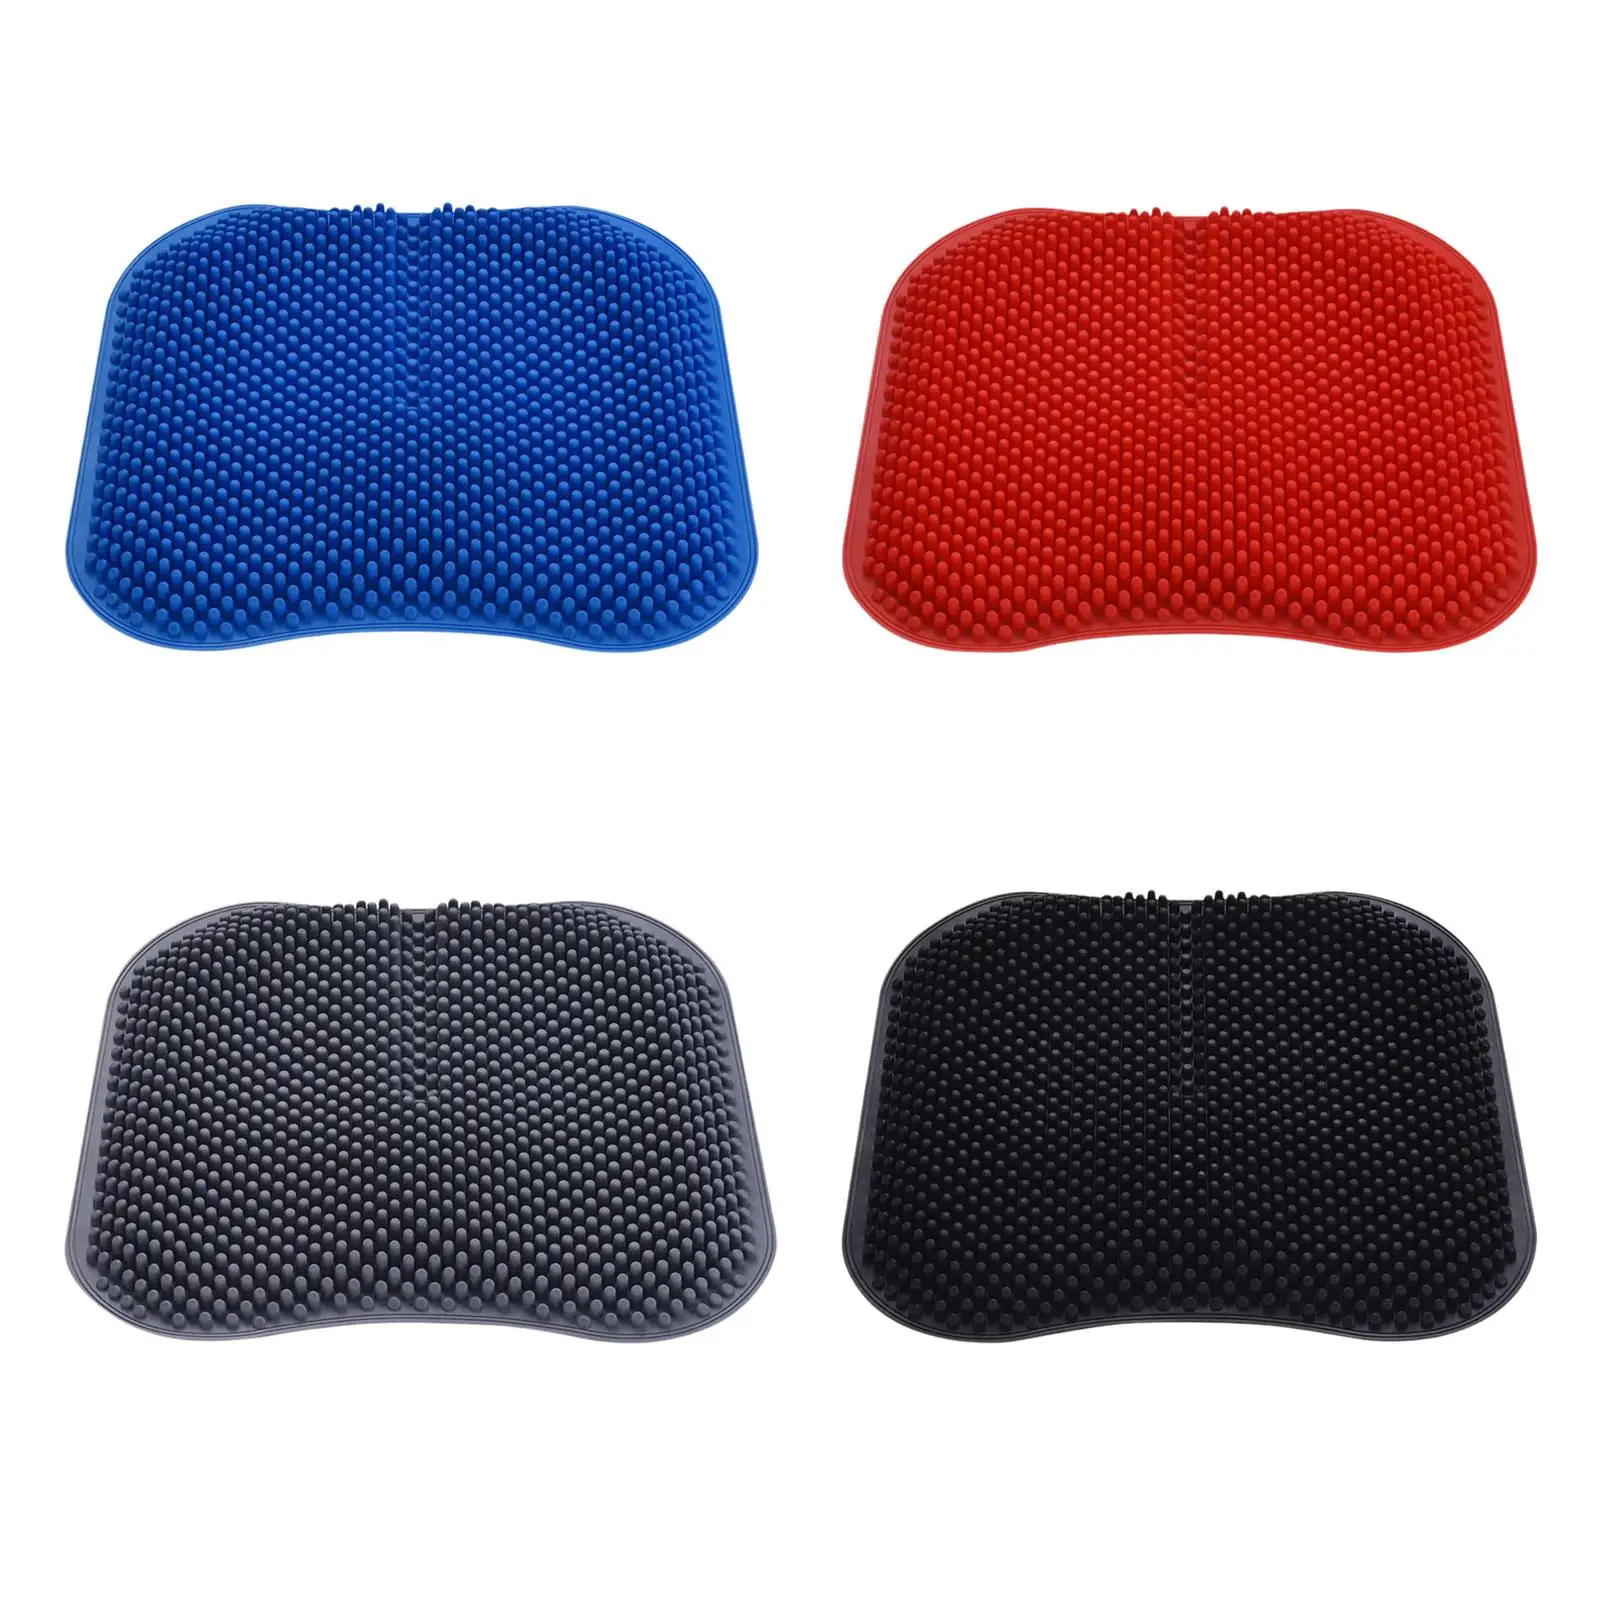 Silicone Car Seat Cushion 3D Pillar Maage Fit for Auto Truck Office Chair Car